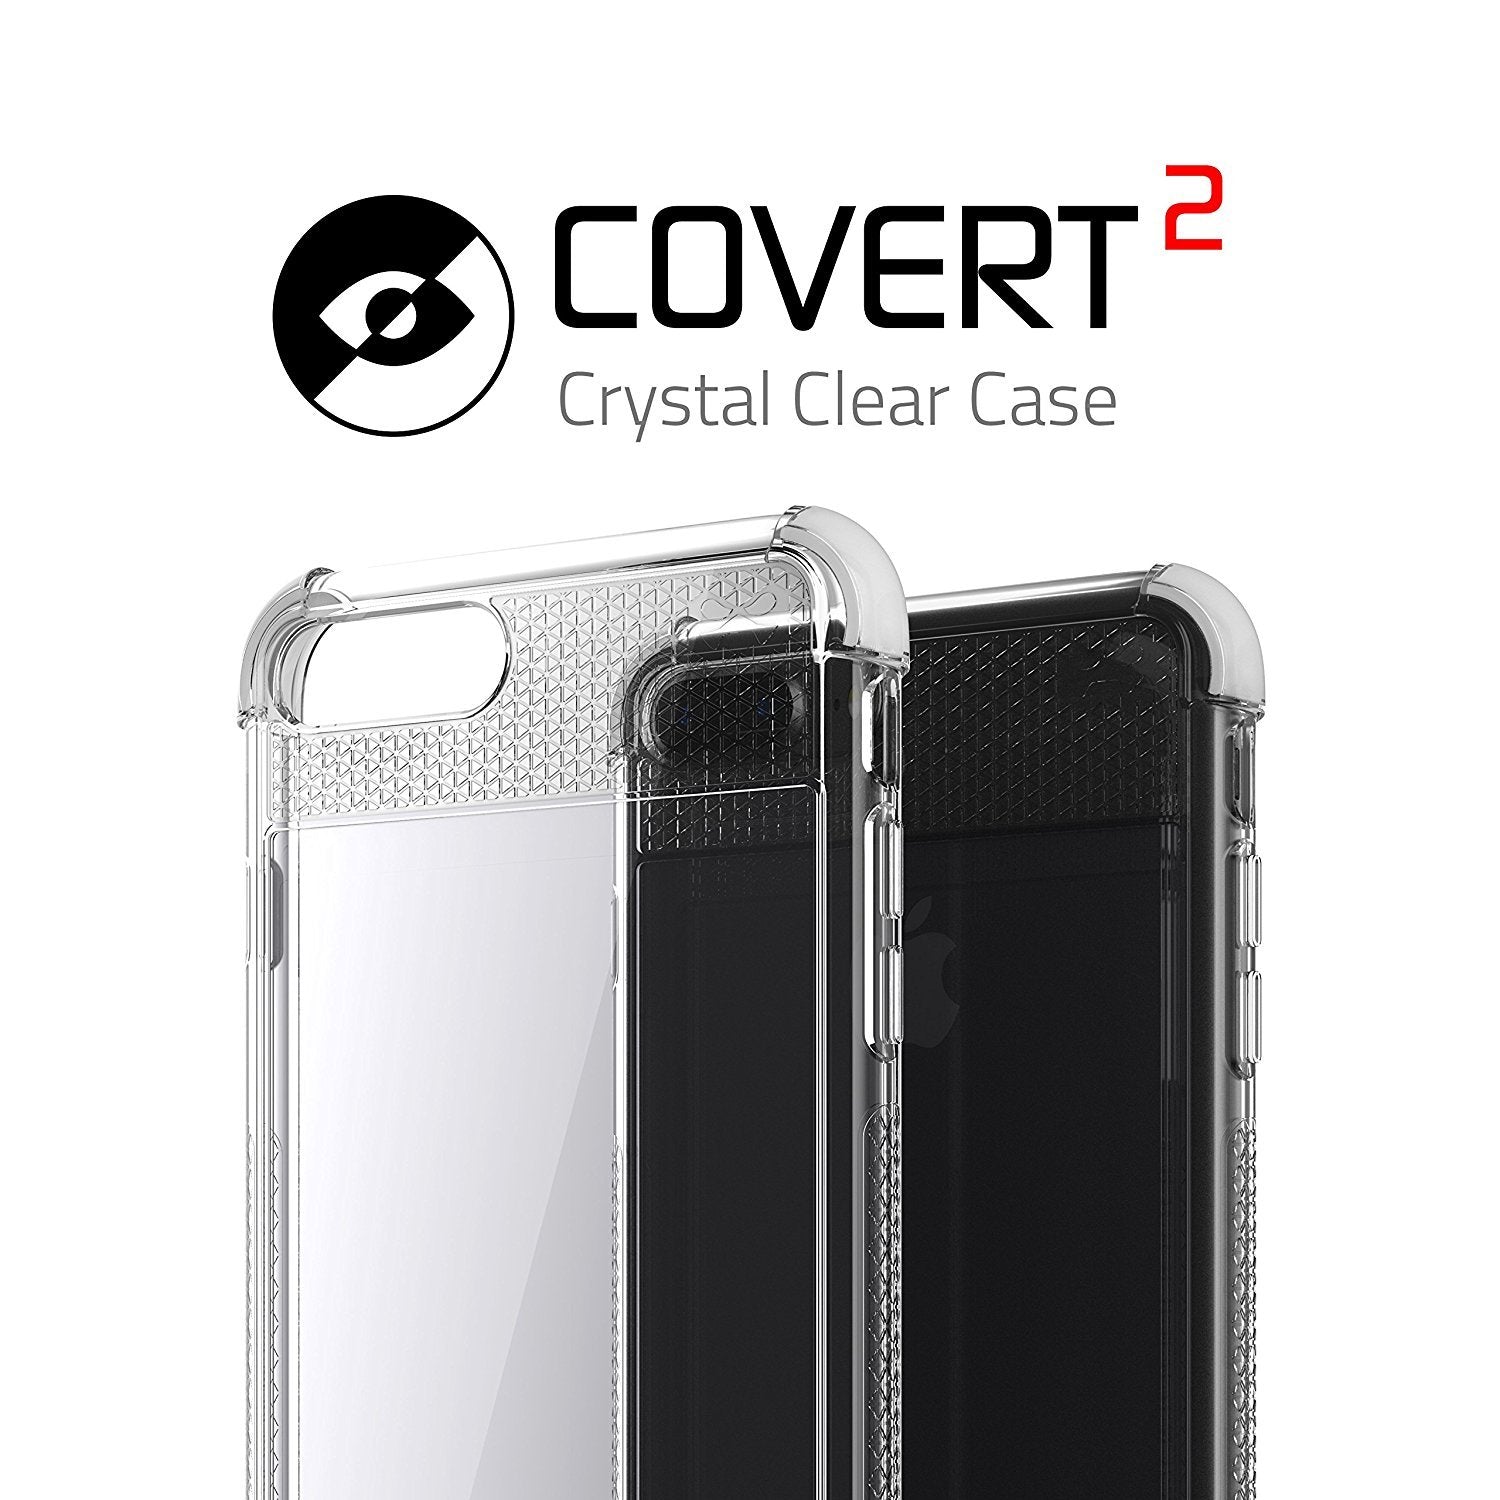 iPhone 8+ Plus Case, Ghostek Covert 2 Series for iPhone 8+ Plus Protective Case [ White]